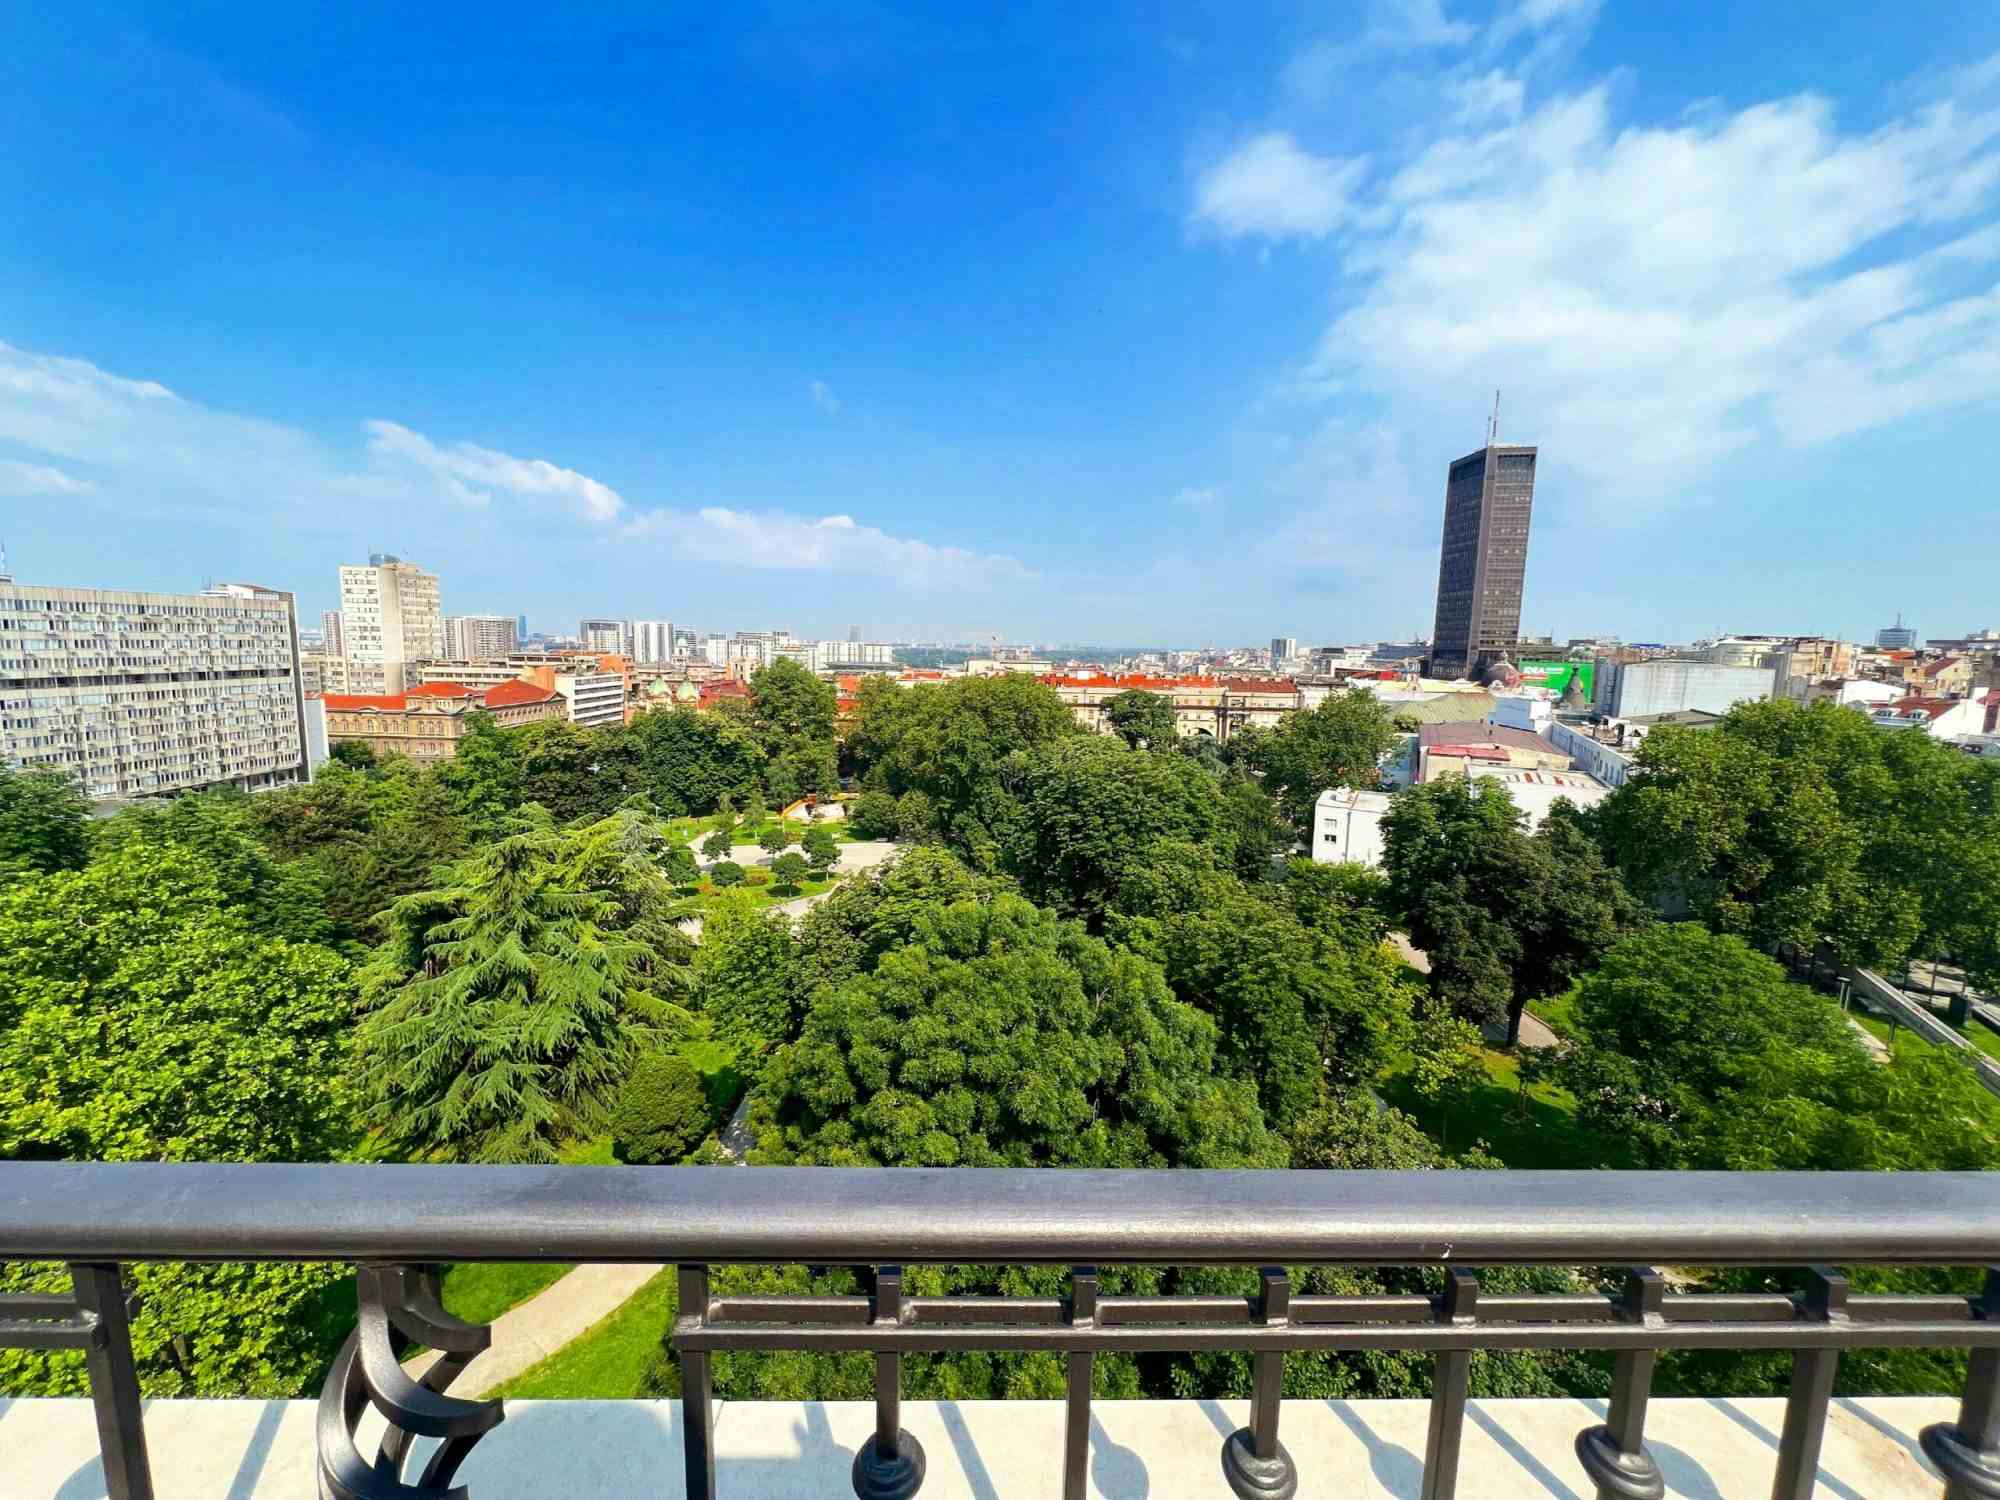 Apartment offering a breathtaking view of Manjež Park